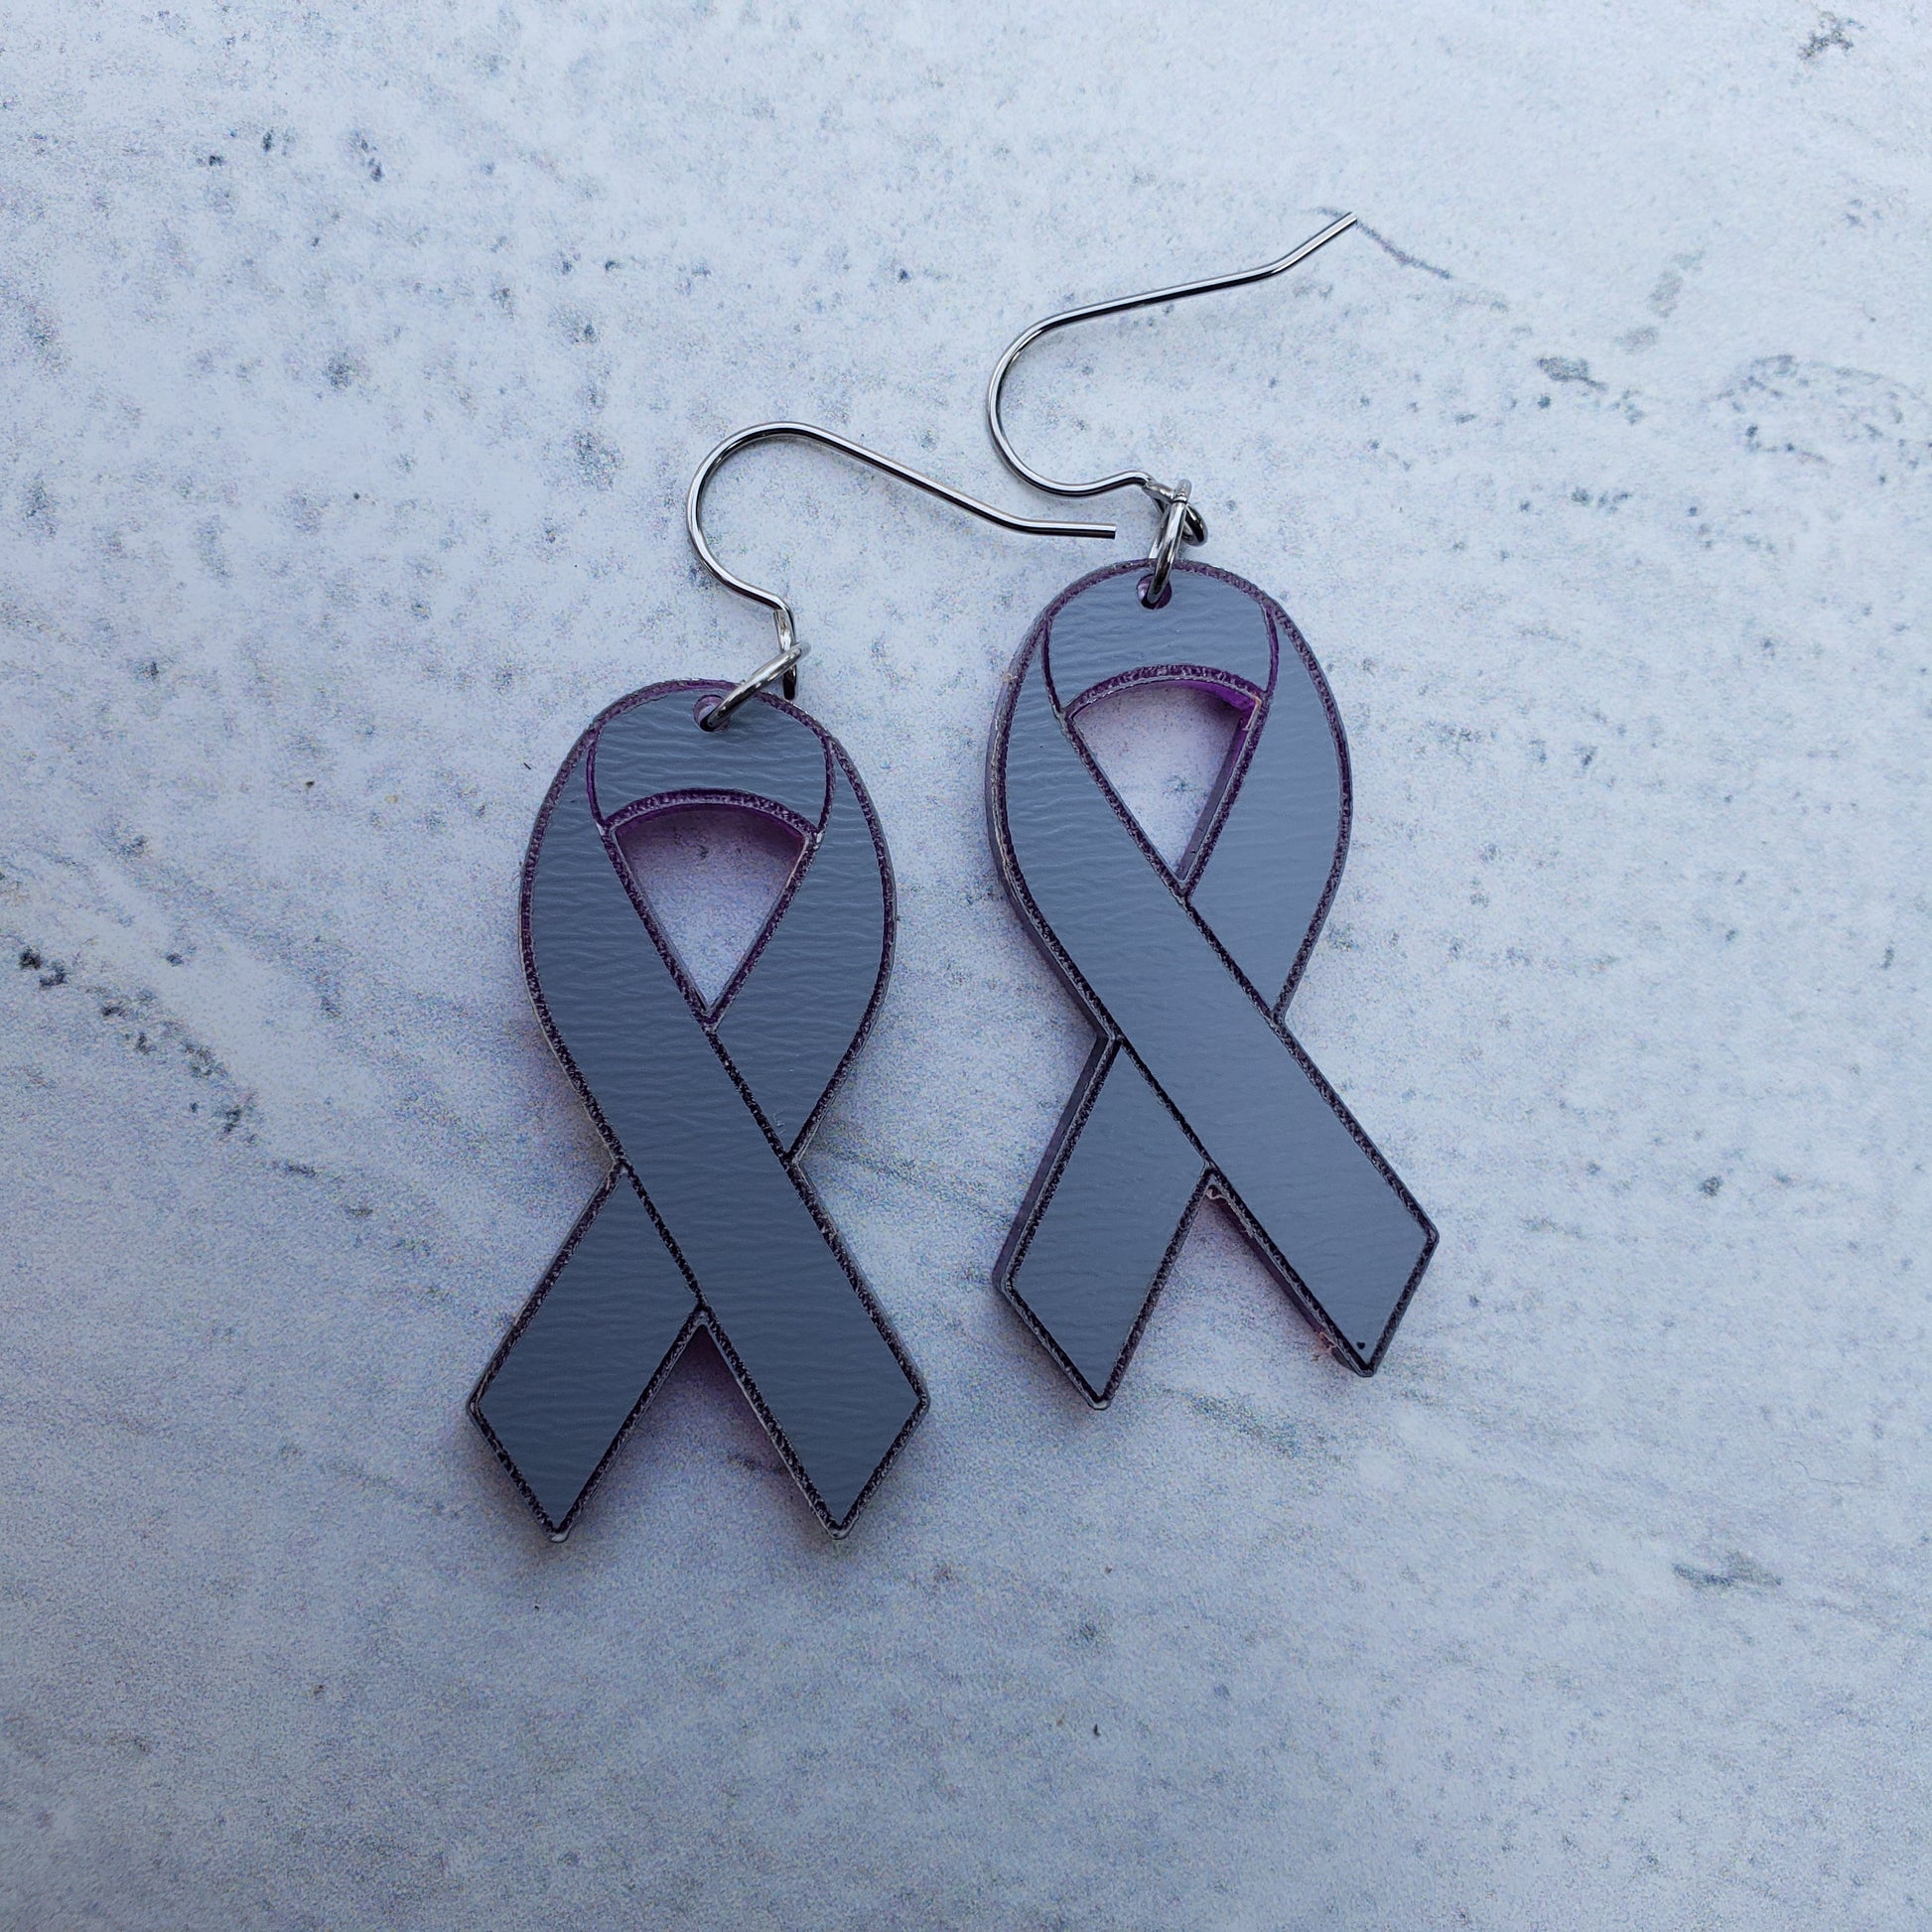 Backside of Classic purple mirror acrylic awareness ribbons on stainless steel earring wires.